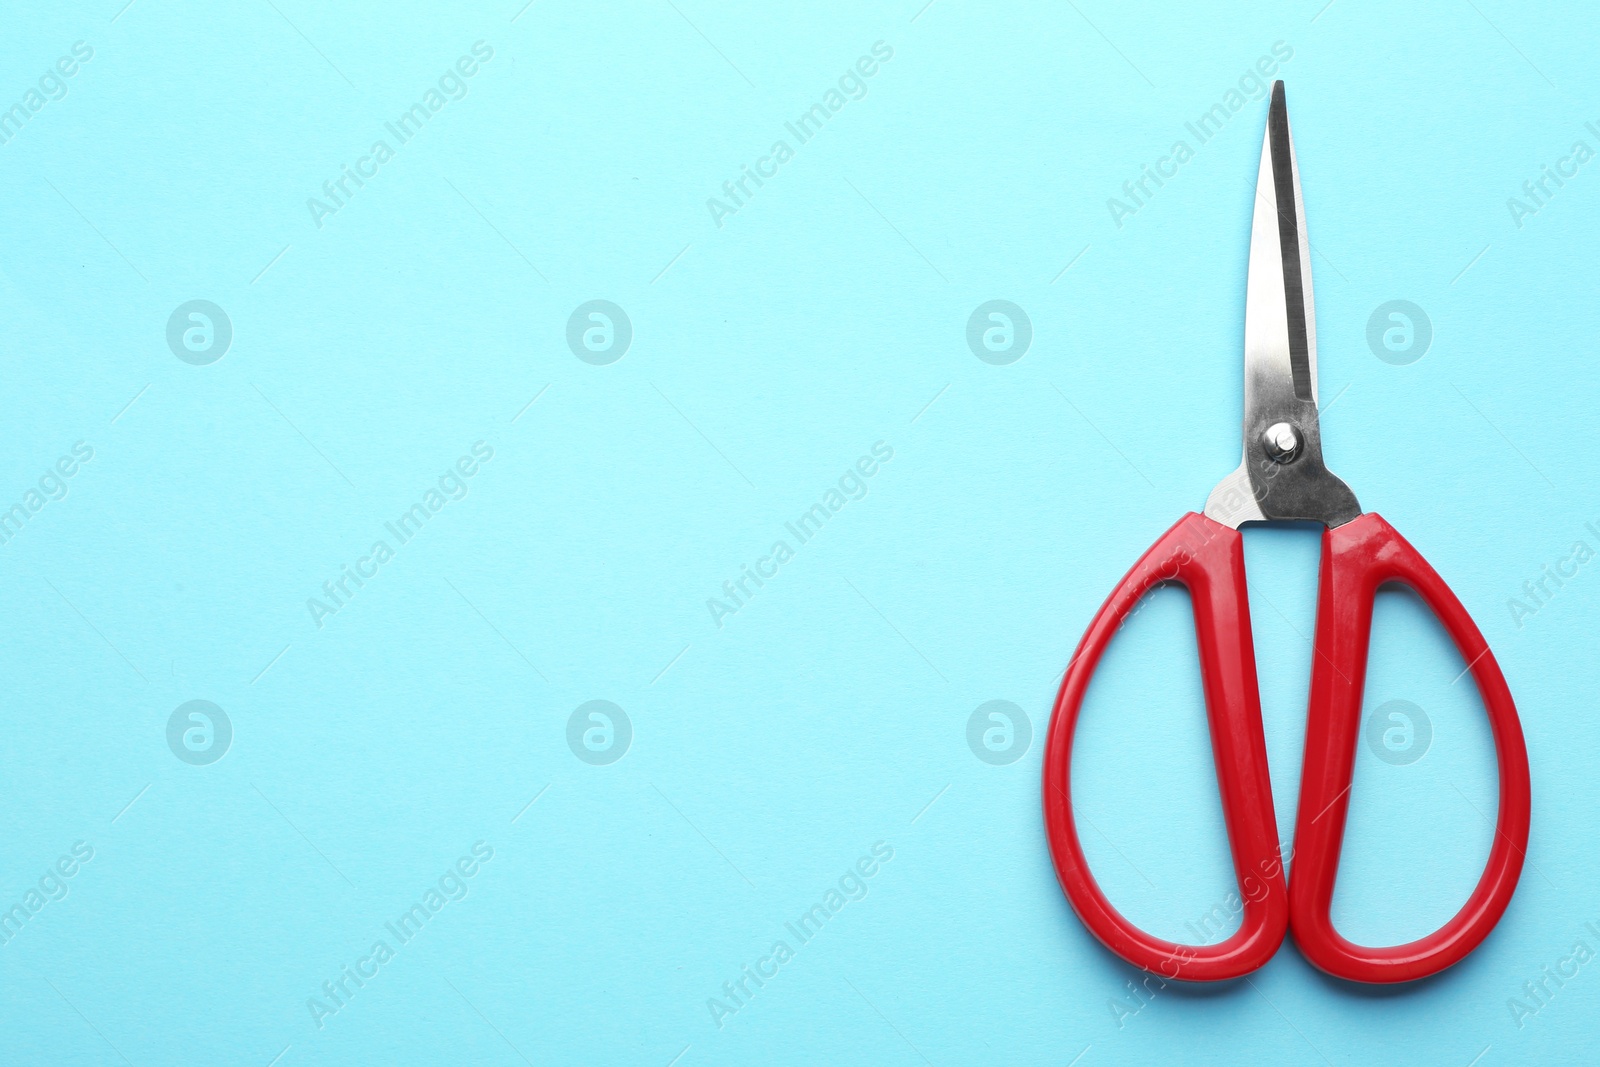 Photo of Pair of sharp scissors on color background, top view. Space for text